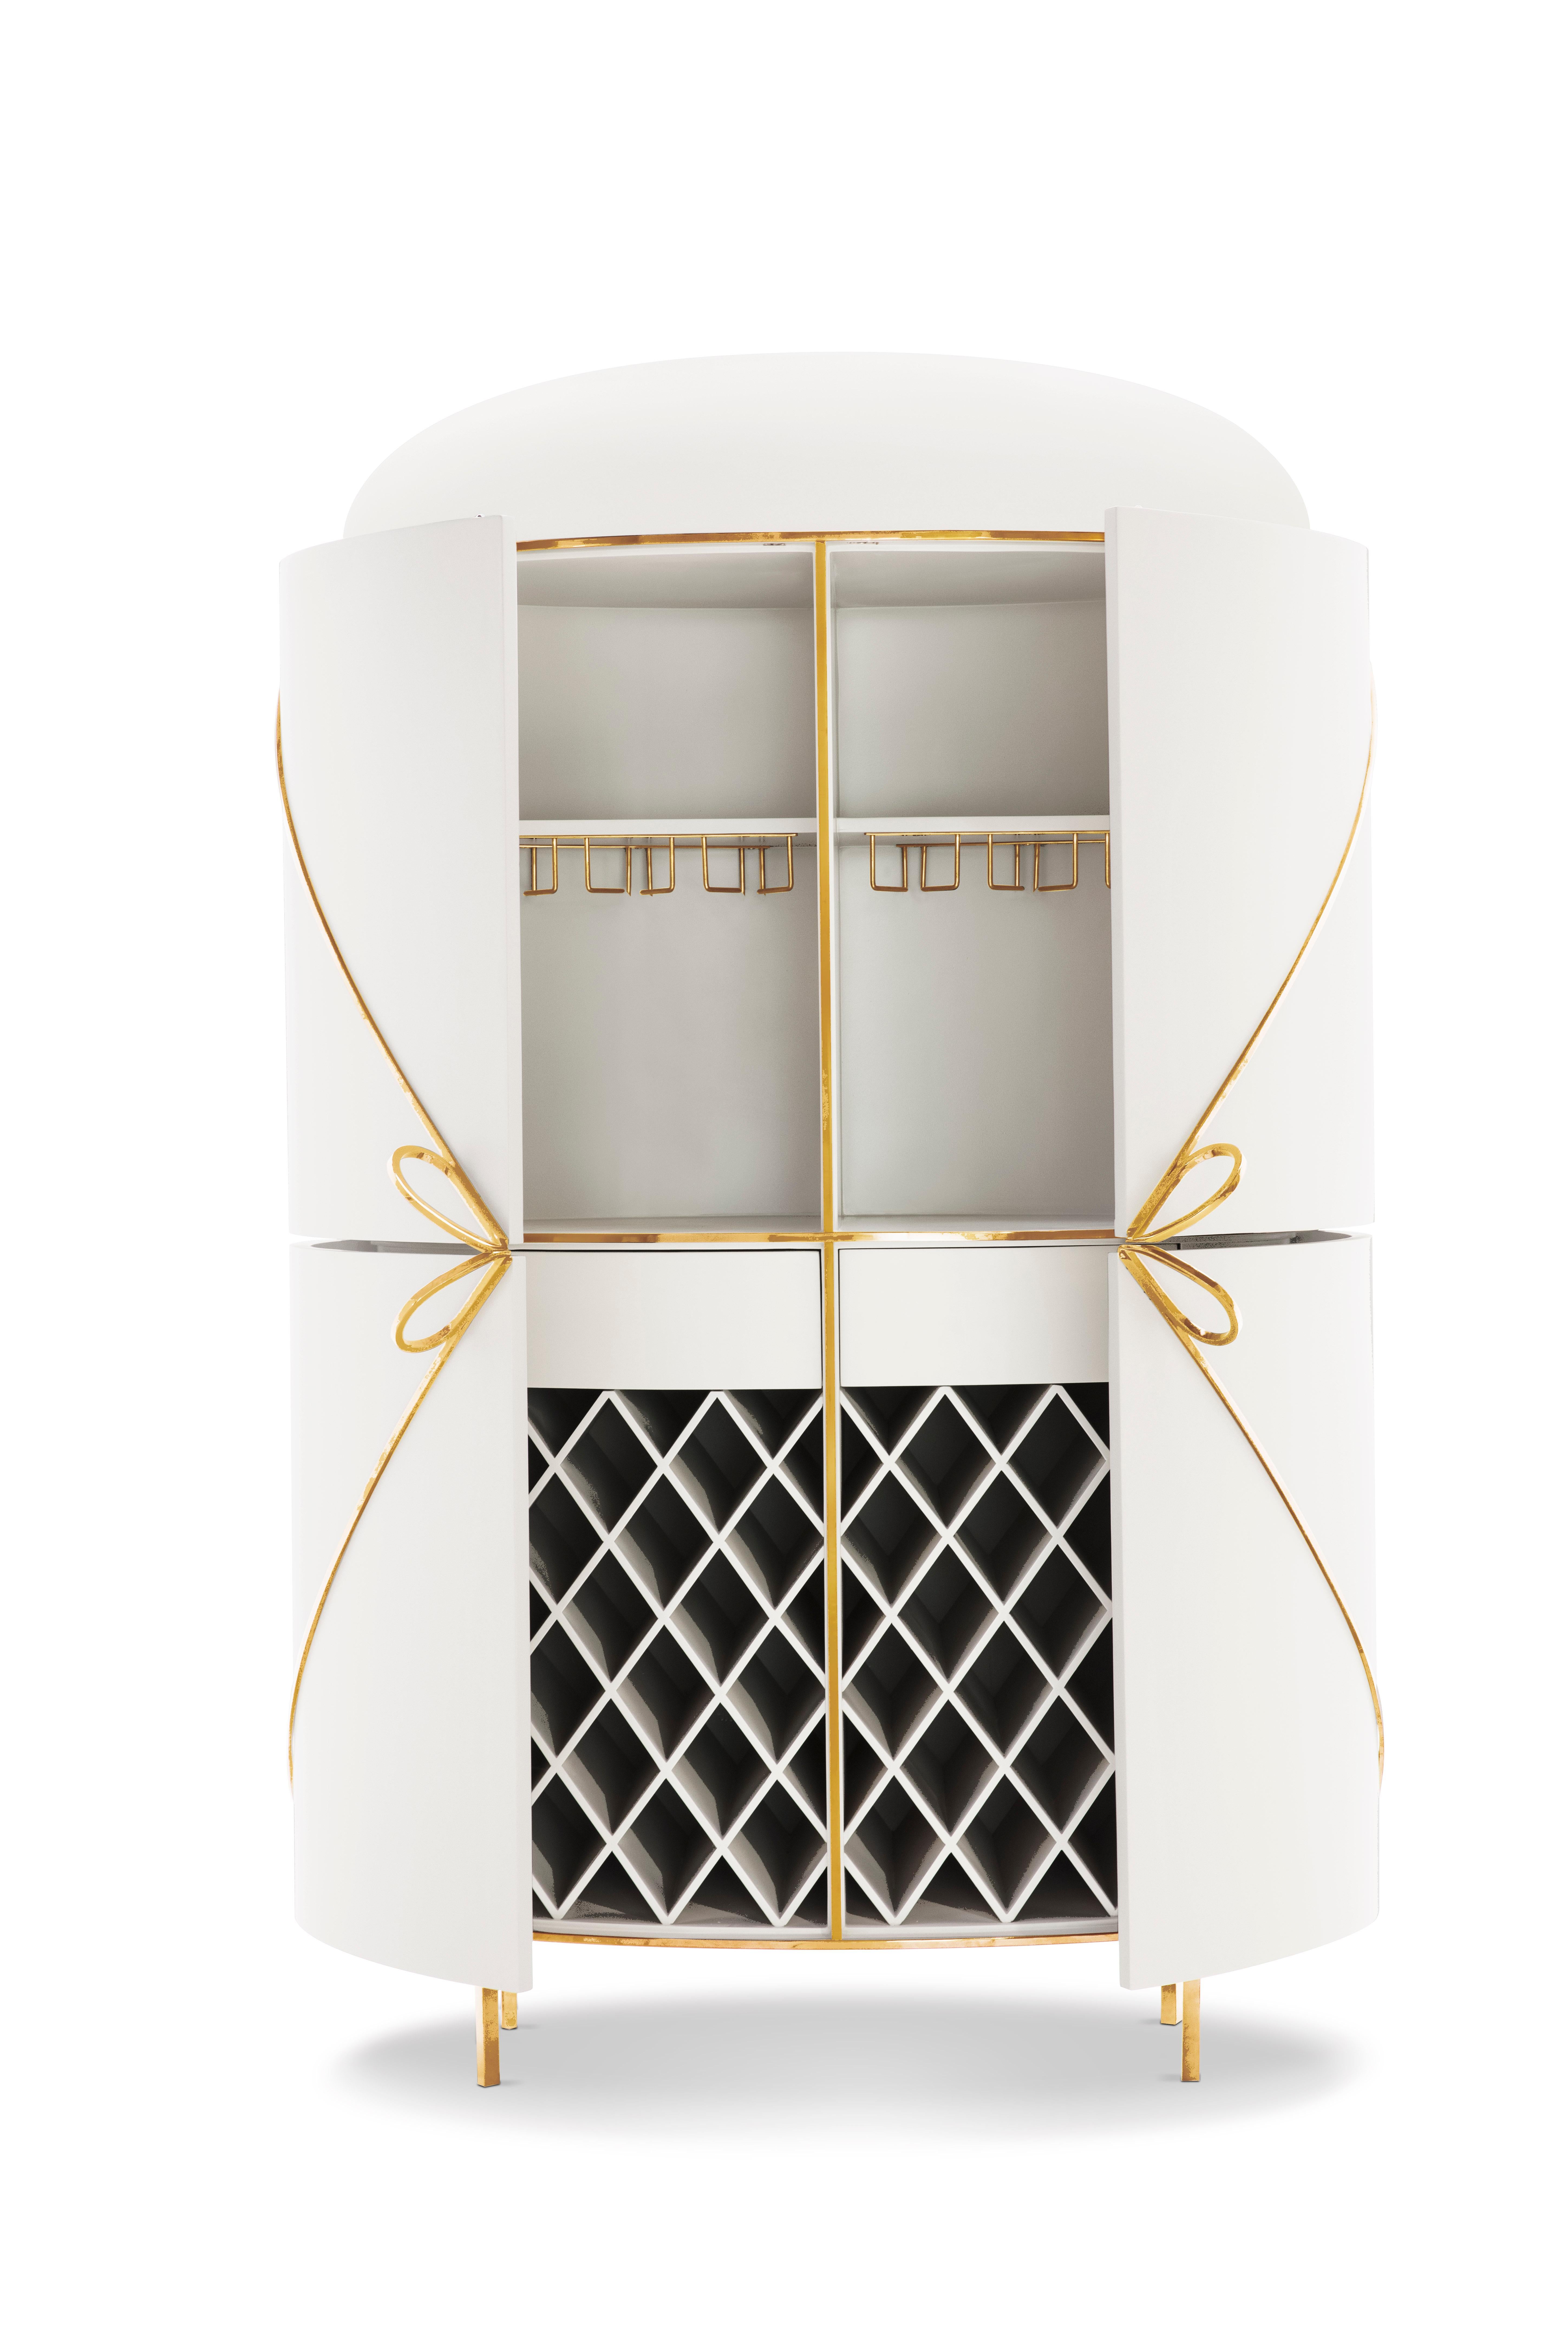 88 Secrets White Bar Cabinet with Gold Trims by Nika Zupanc is a pristine, white bar cabinet in sensuous, feminine lines with luxurious metal trims in gold. A statement piece in any interior space!

Nika Zupanc, a strikingly renowned Slovenian